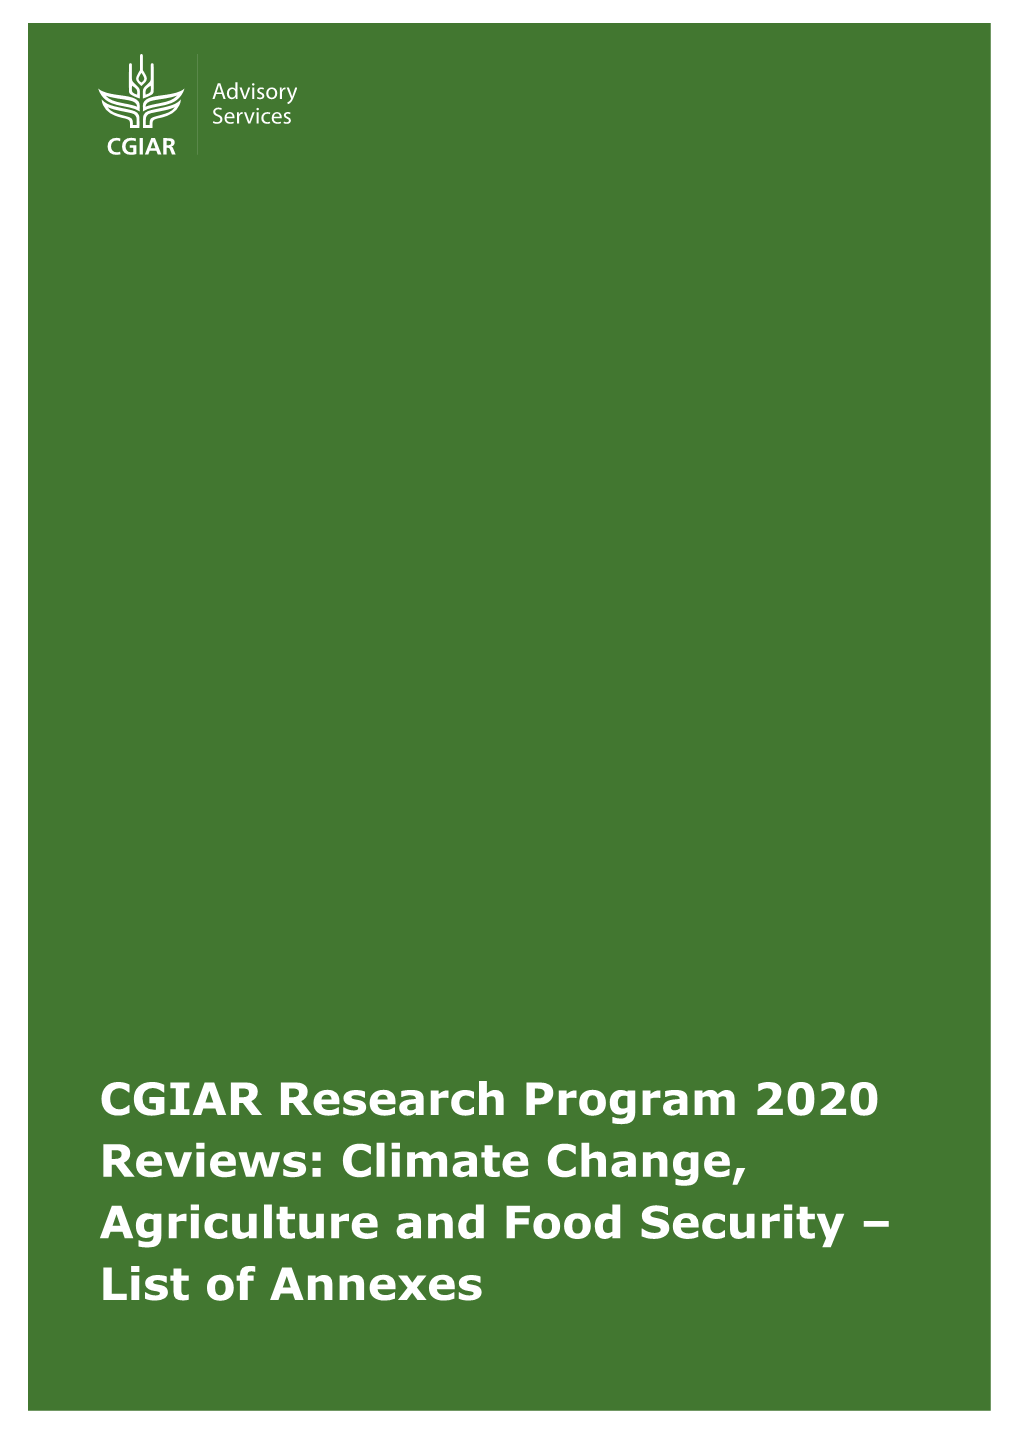 CGIAR Research Program 2020 Reviews: Climate Change, Agriculture and Food Security – List of Annexes